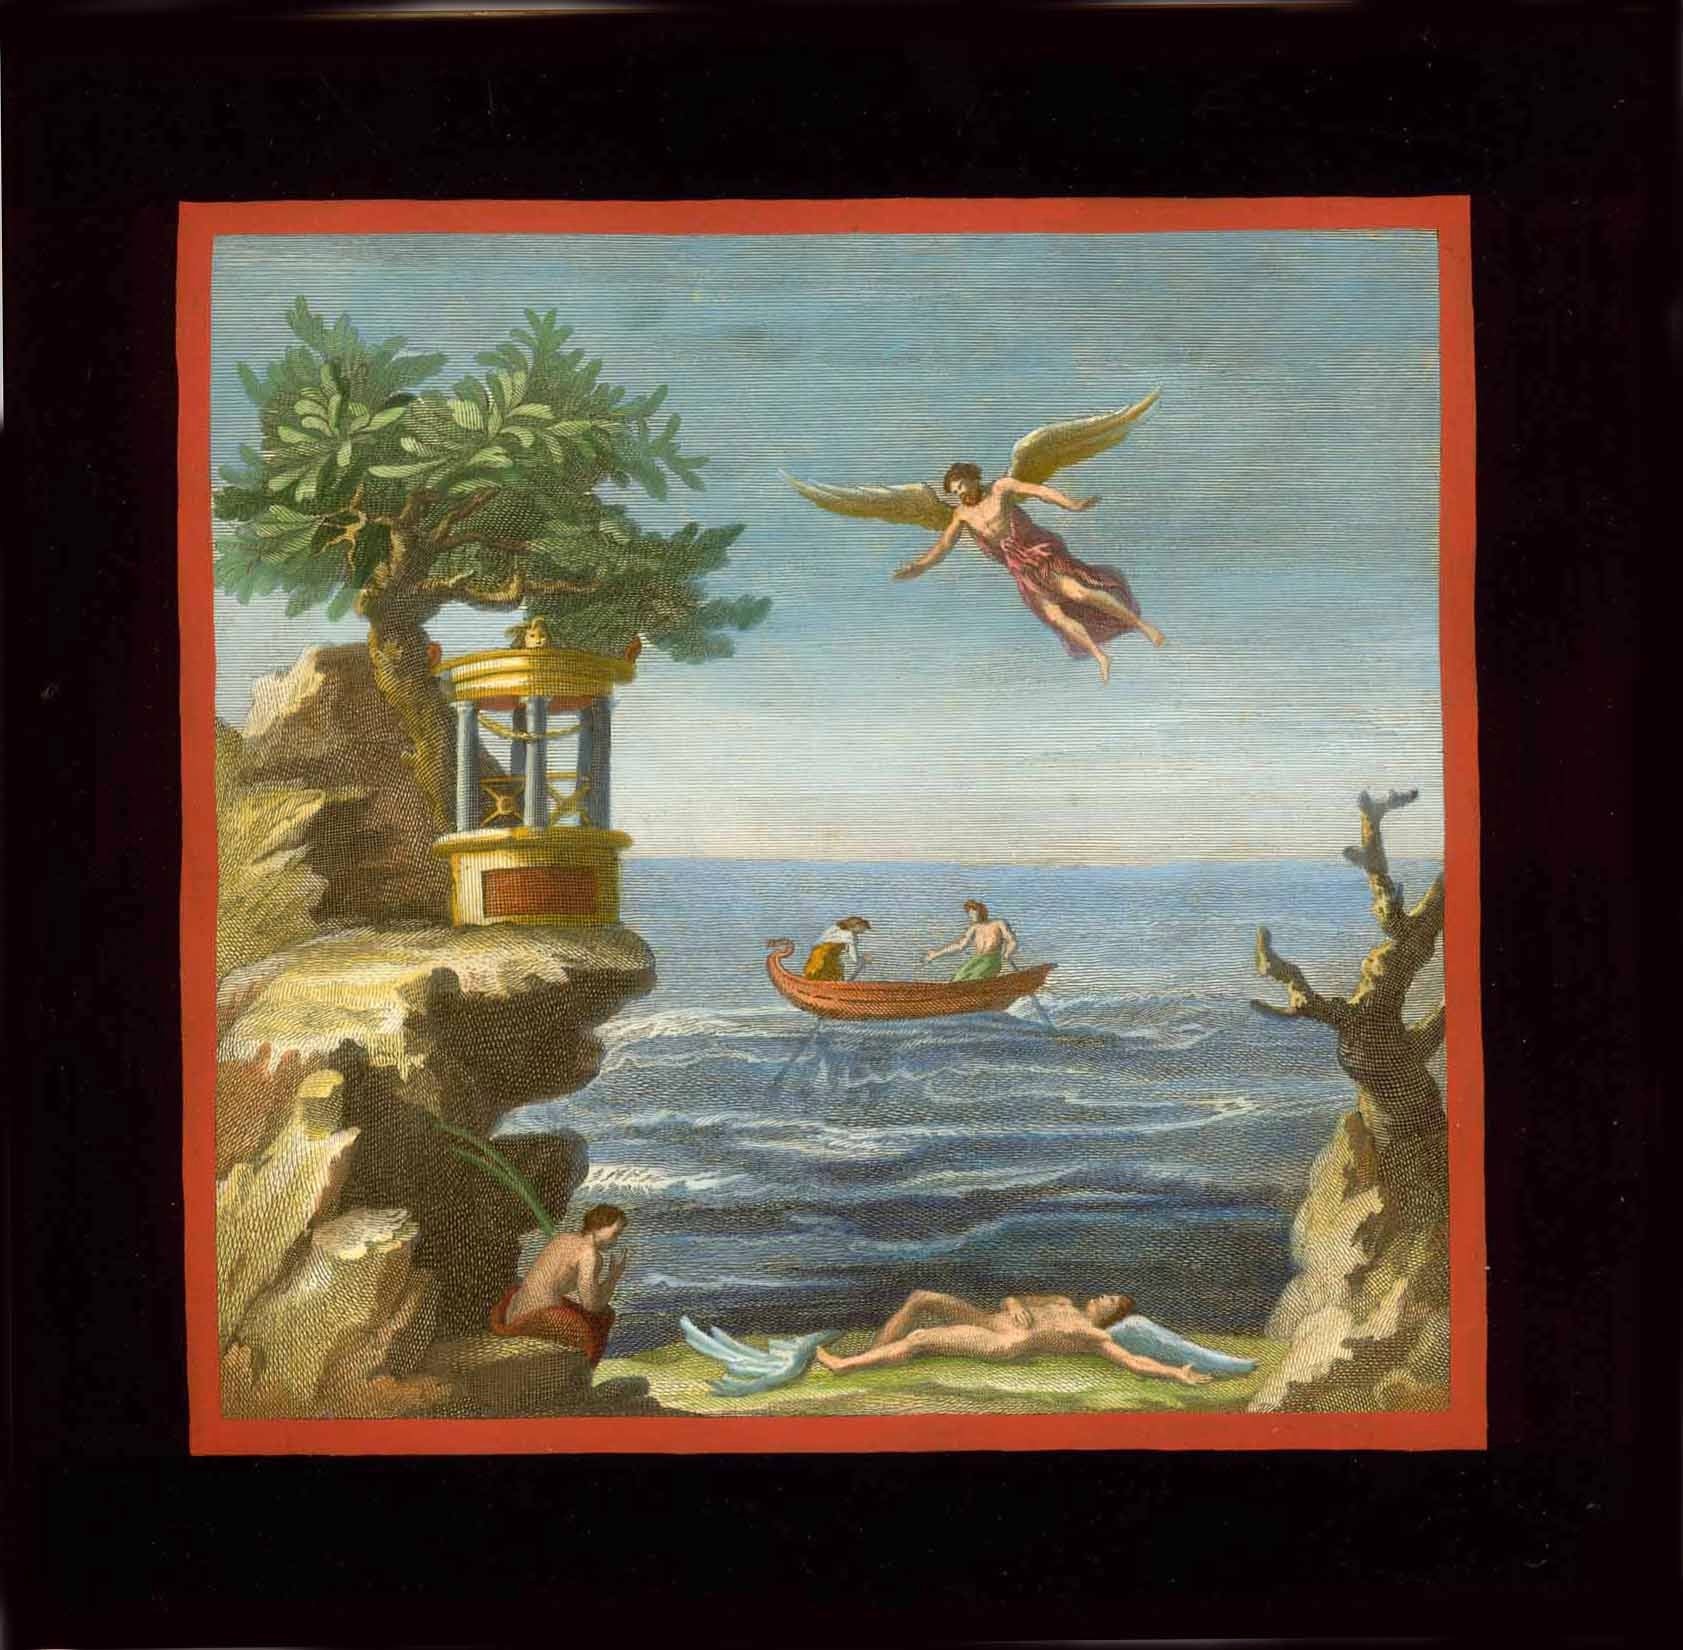 No title. - Ikarus crashed  Hand-colored copper etching.  Published in "Le Antichità di Ercolano Esposte"  Naples (Napoli, Neapel), 1757-1792 (in eight volumes)  Imprisoned by King Minos, Ikarus and his father Daedalus knew only one escape way: by flying. They manufactured wings for themselves held together by wax. Daedalos emphasized to his son, not to get too close to the sun, lest the wax would melt. But Ikarus, exuberant as he was, disregarded his father's admonishment. The heat of the sun melted the wa